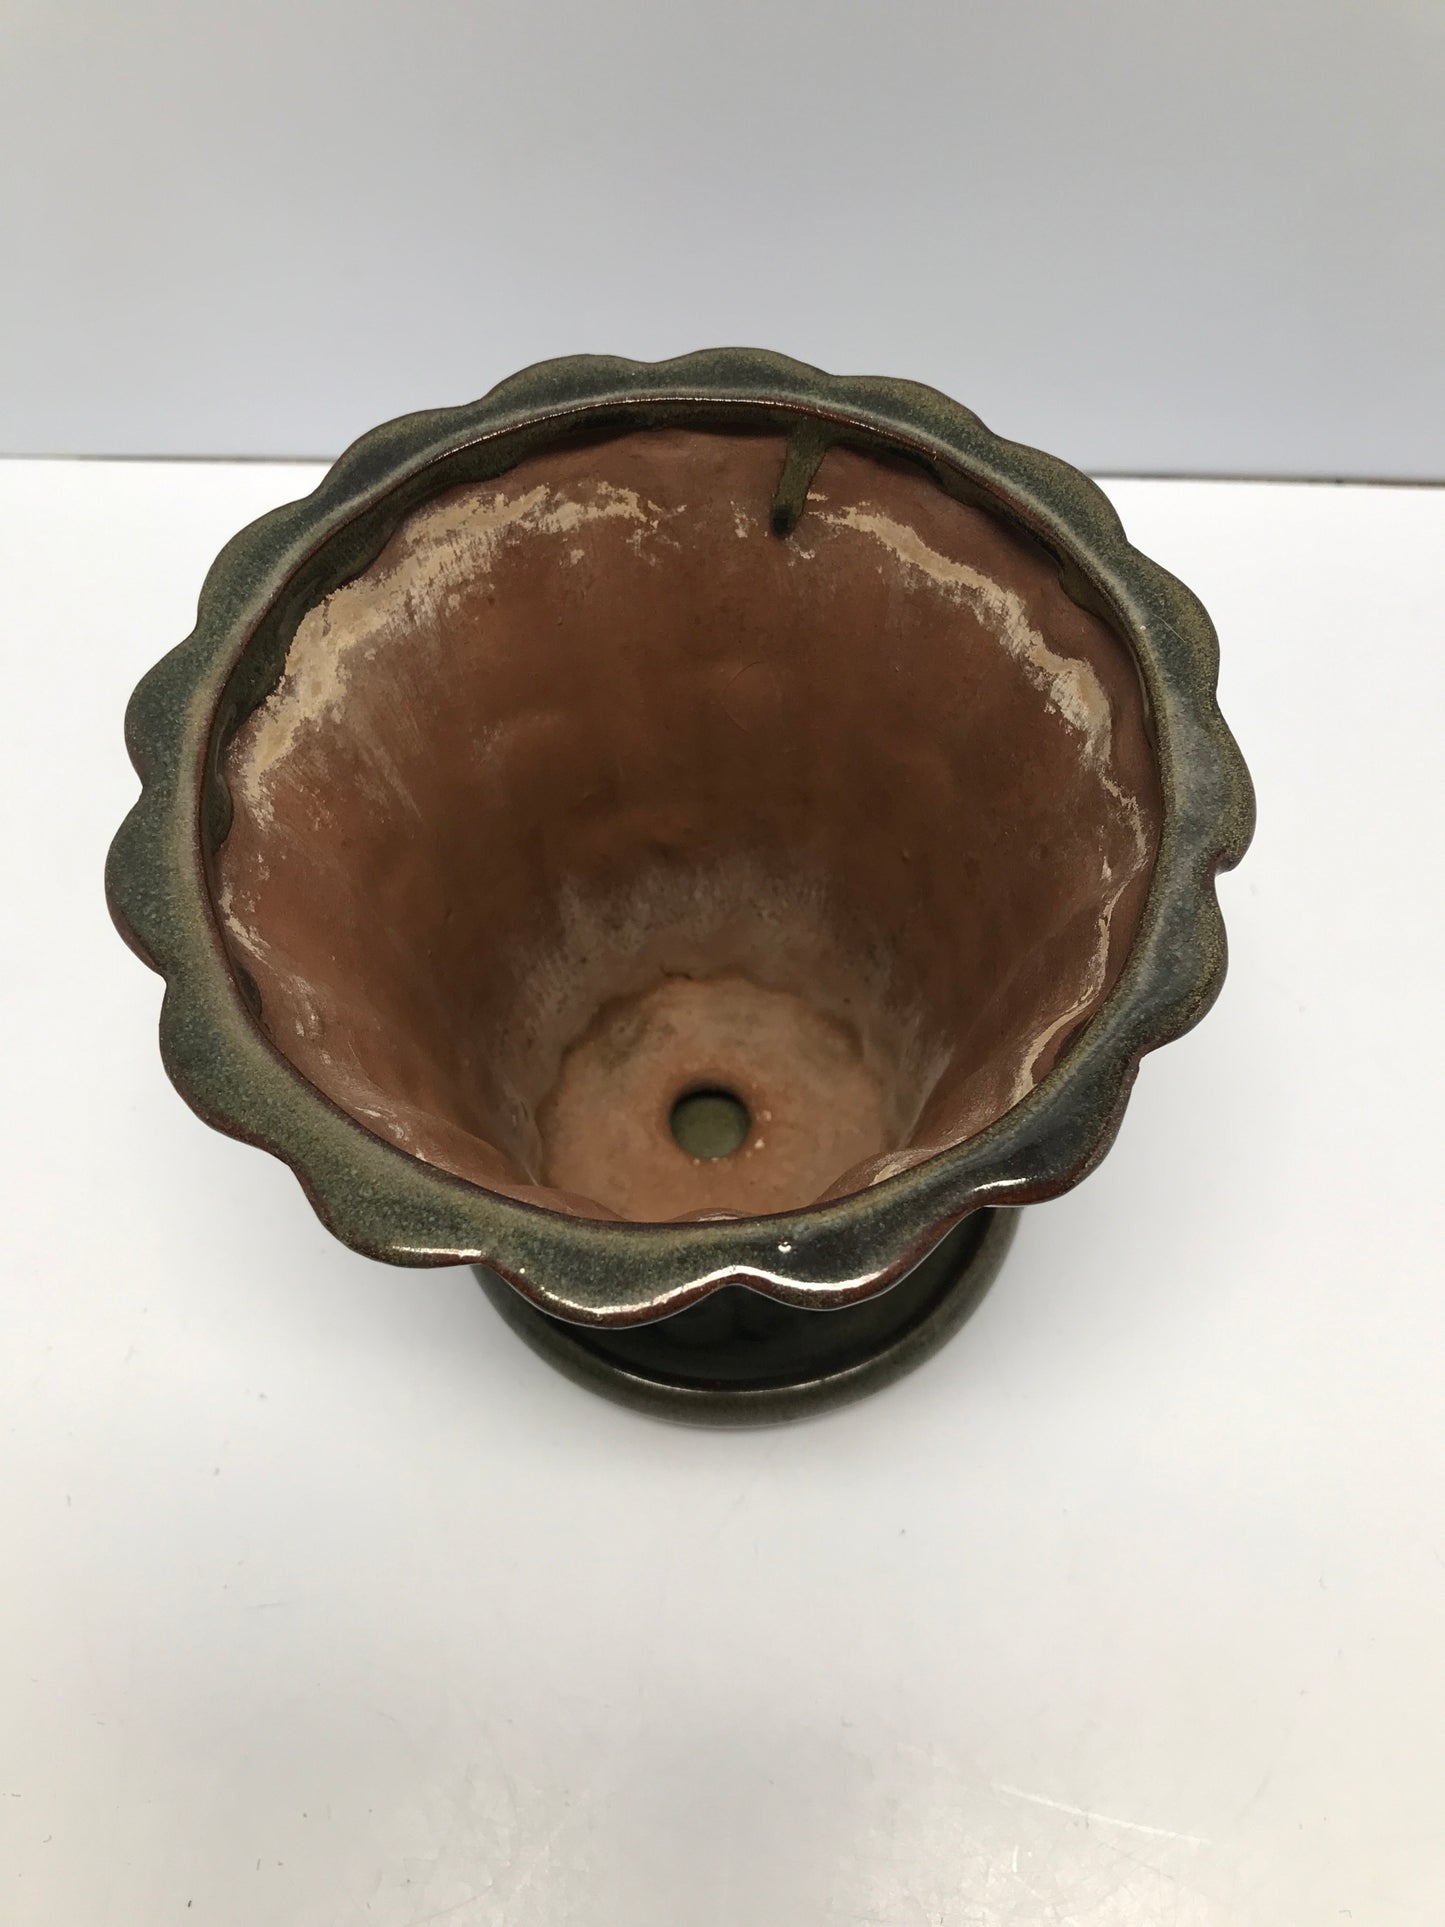 Pottery Indoor Planter With Base 6x7x5in Sage Green 1 Tiny Chip